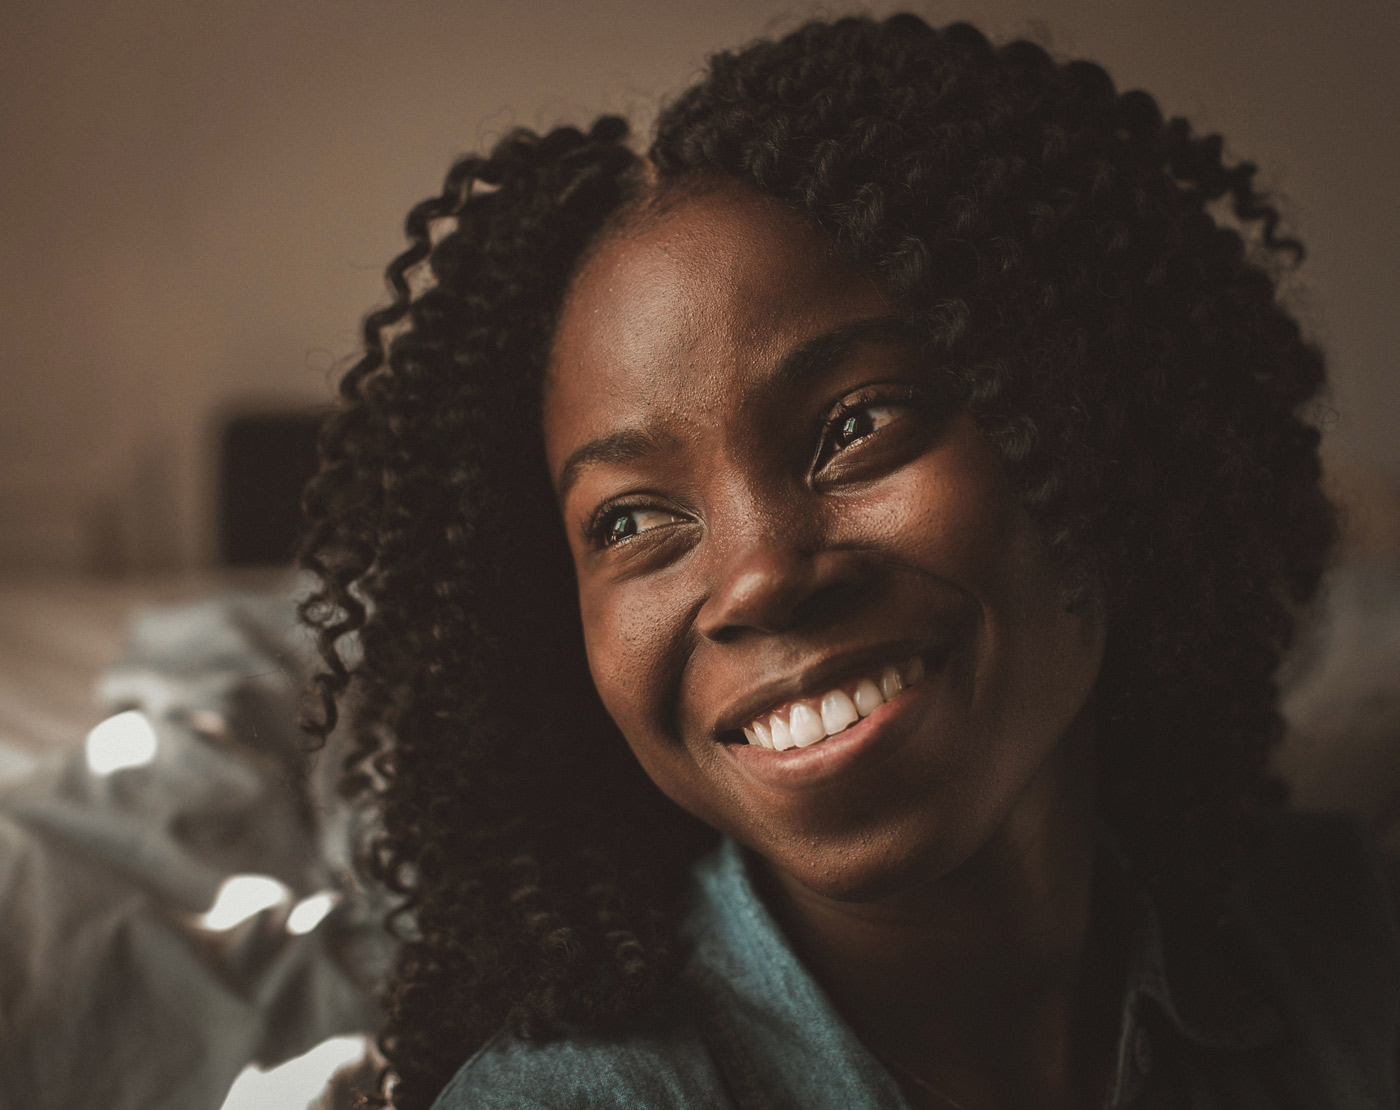 A relaxed and happy African American woman smiles and looks just beyond the camera.